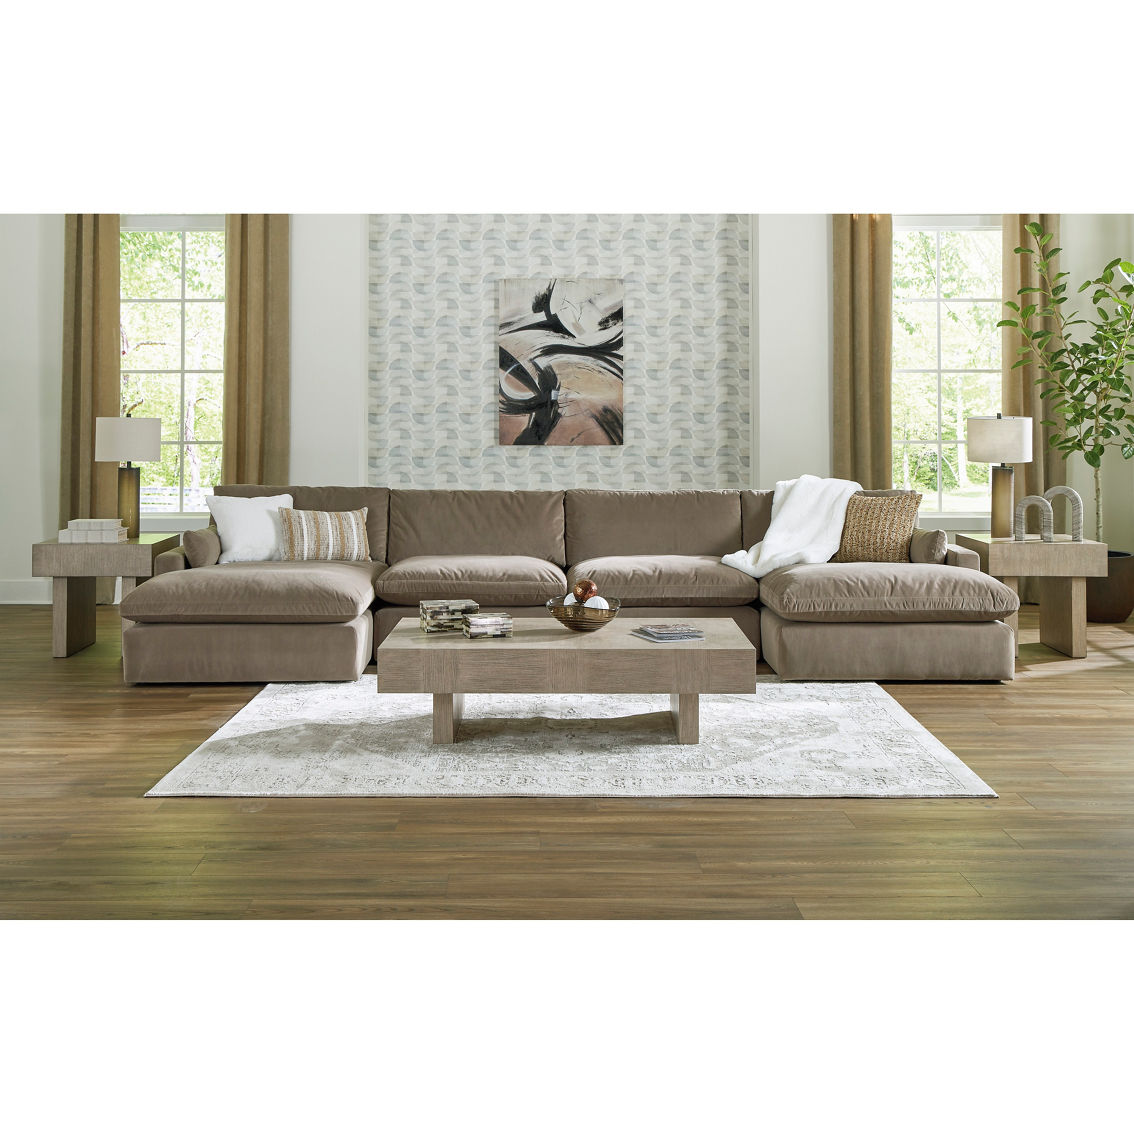 Signature Design by Ashley Sophie 4 pc. Sectional with Chaise - Image 2 of 2